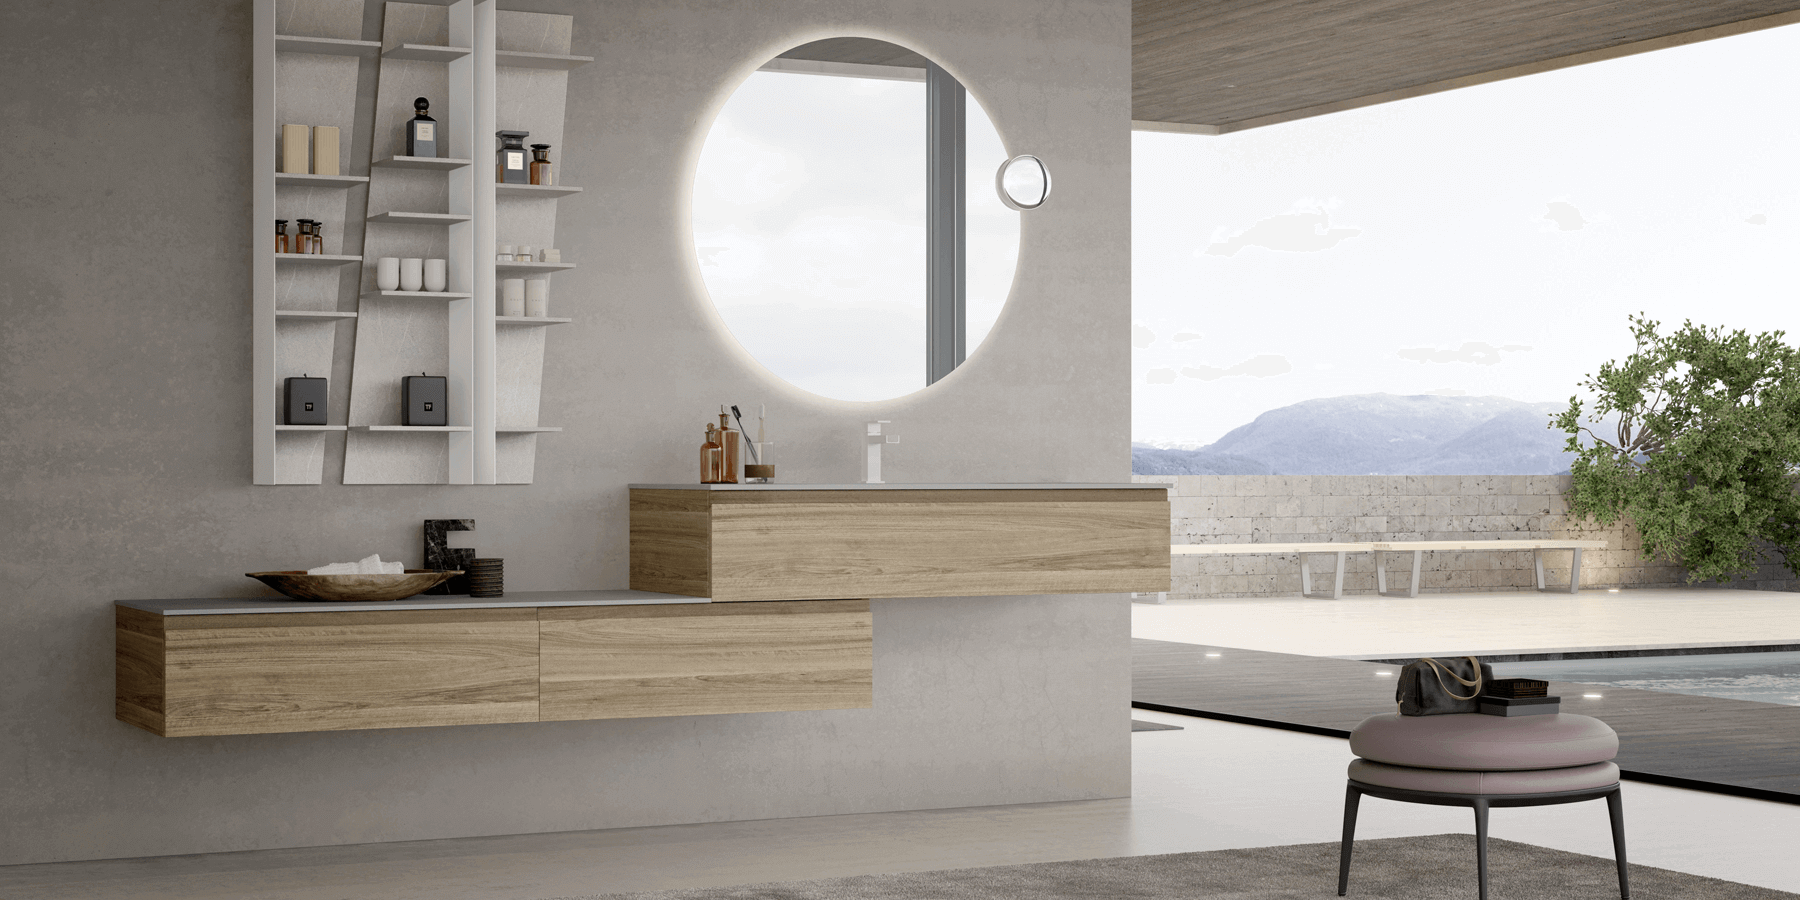 https://21569224.fs1.hubspotusercontent-na1.net/hub/21569224/hubfs/Hastings_2023/images/02.%20Storage%20and%20Shelving/Luxury%20floating%20bathroom%20cabinets%20with%20Mirror.png?width=1800&height=900&name=Luxury%20floating%20bathroom%20cabinets%20with%20Mirror.png